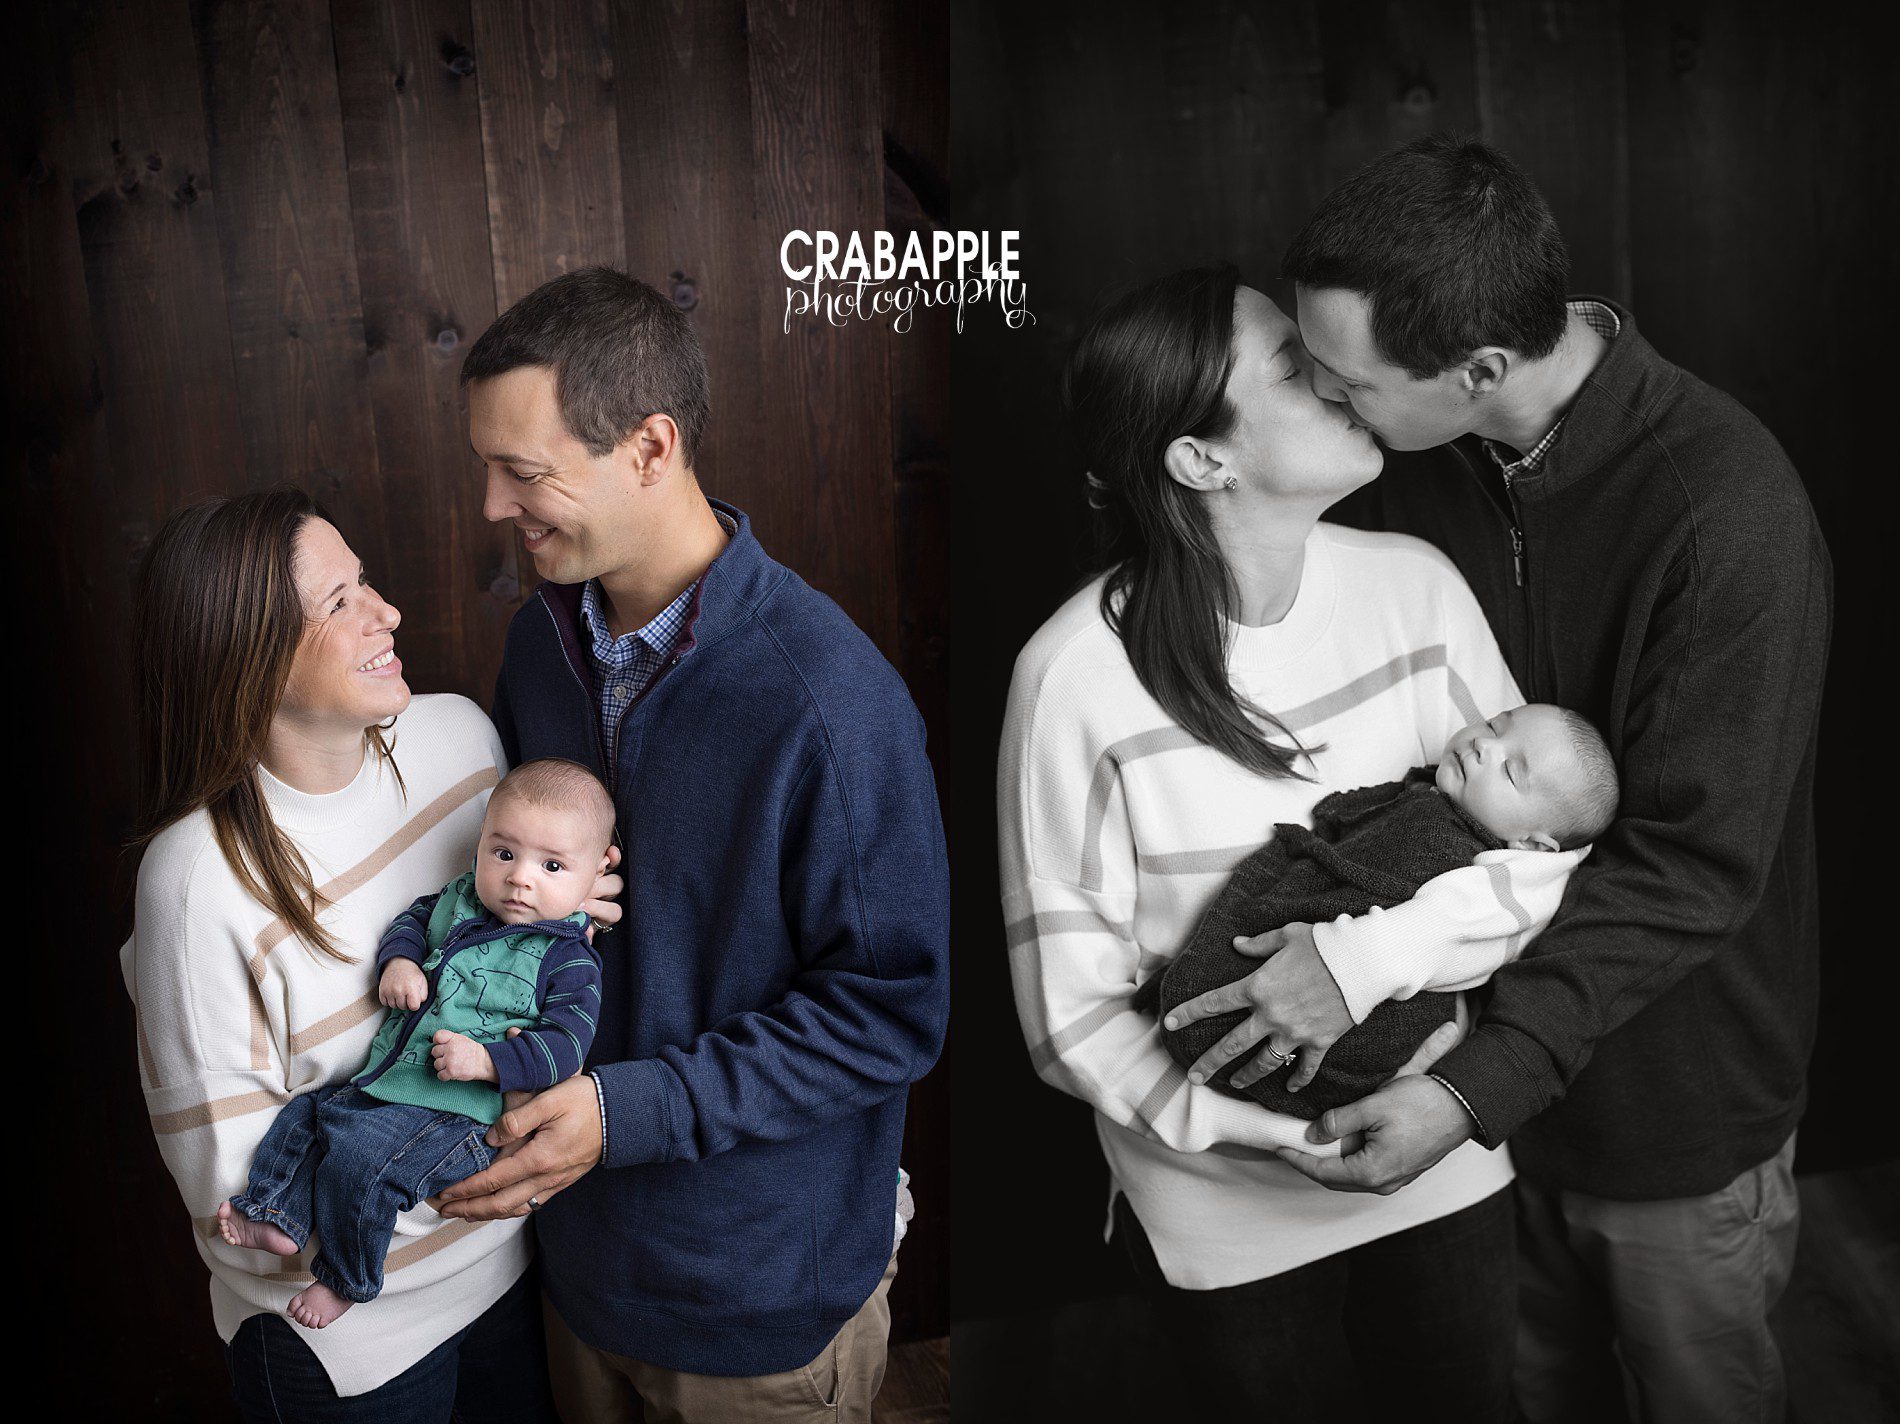 Posing ideas and inspiration for family photos with 3 month old baby.